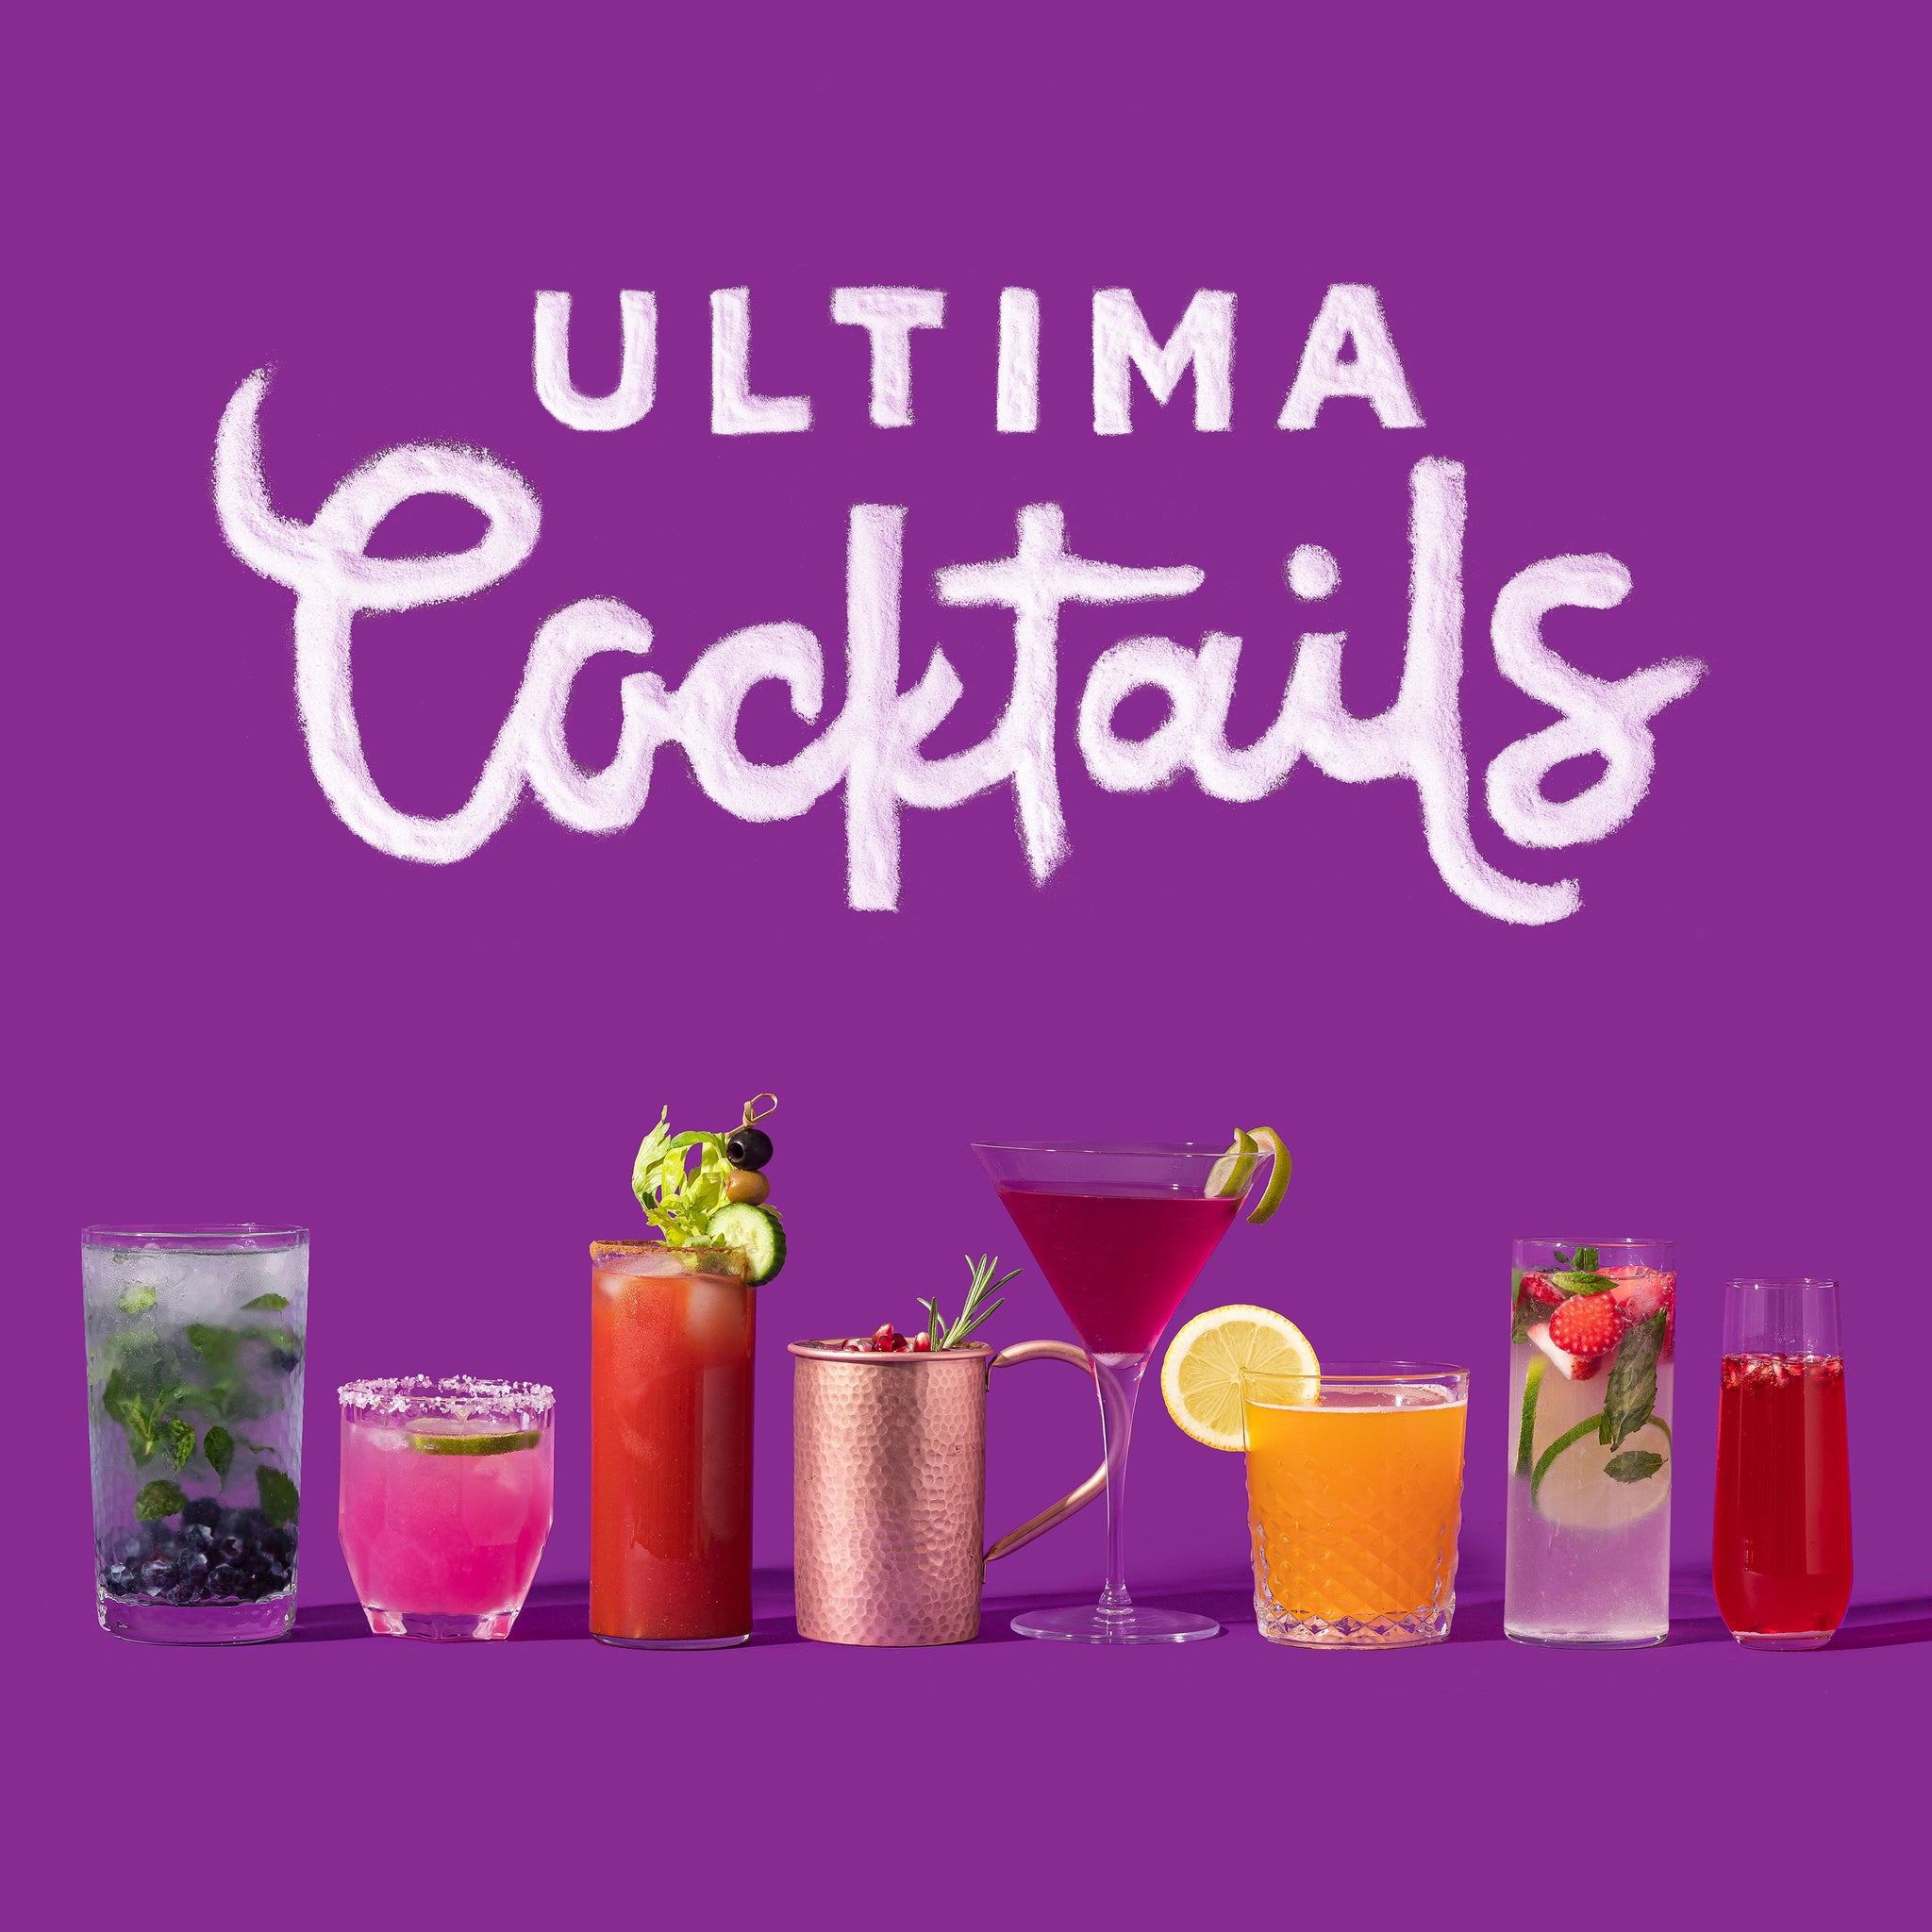 Ultima Cocktails To Celebrate The Playful Side of Life